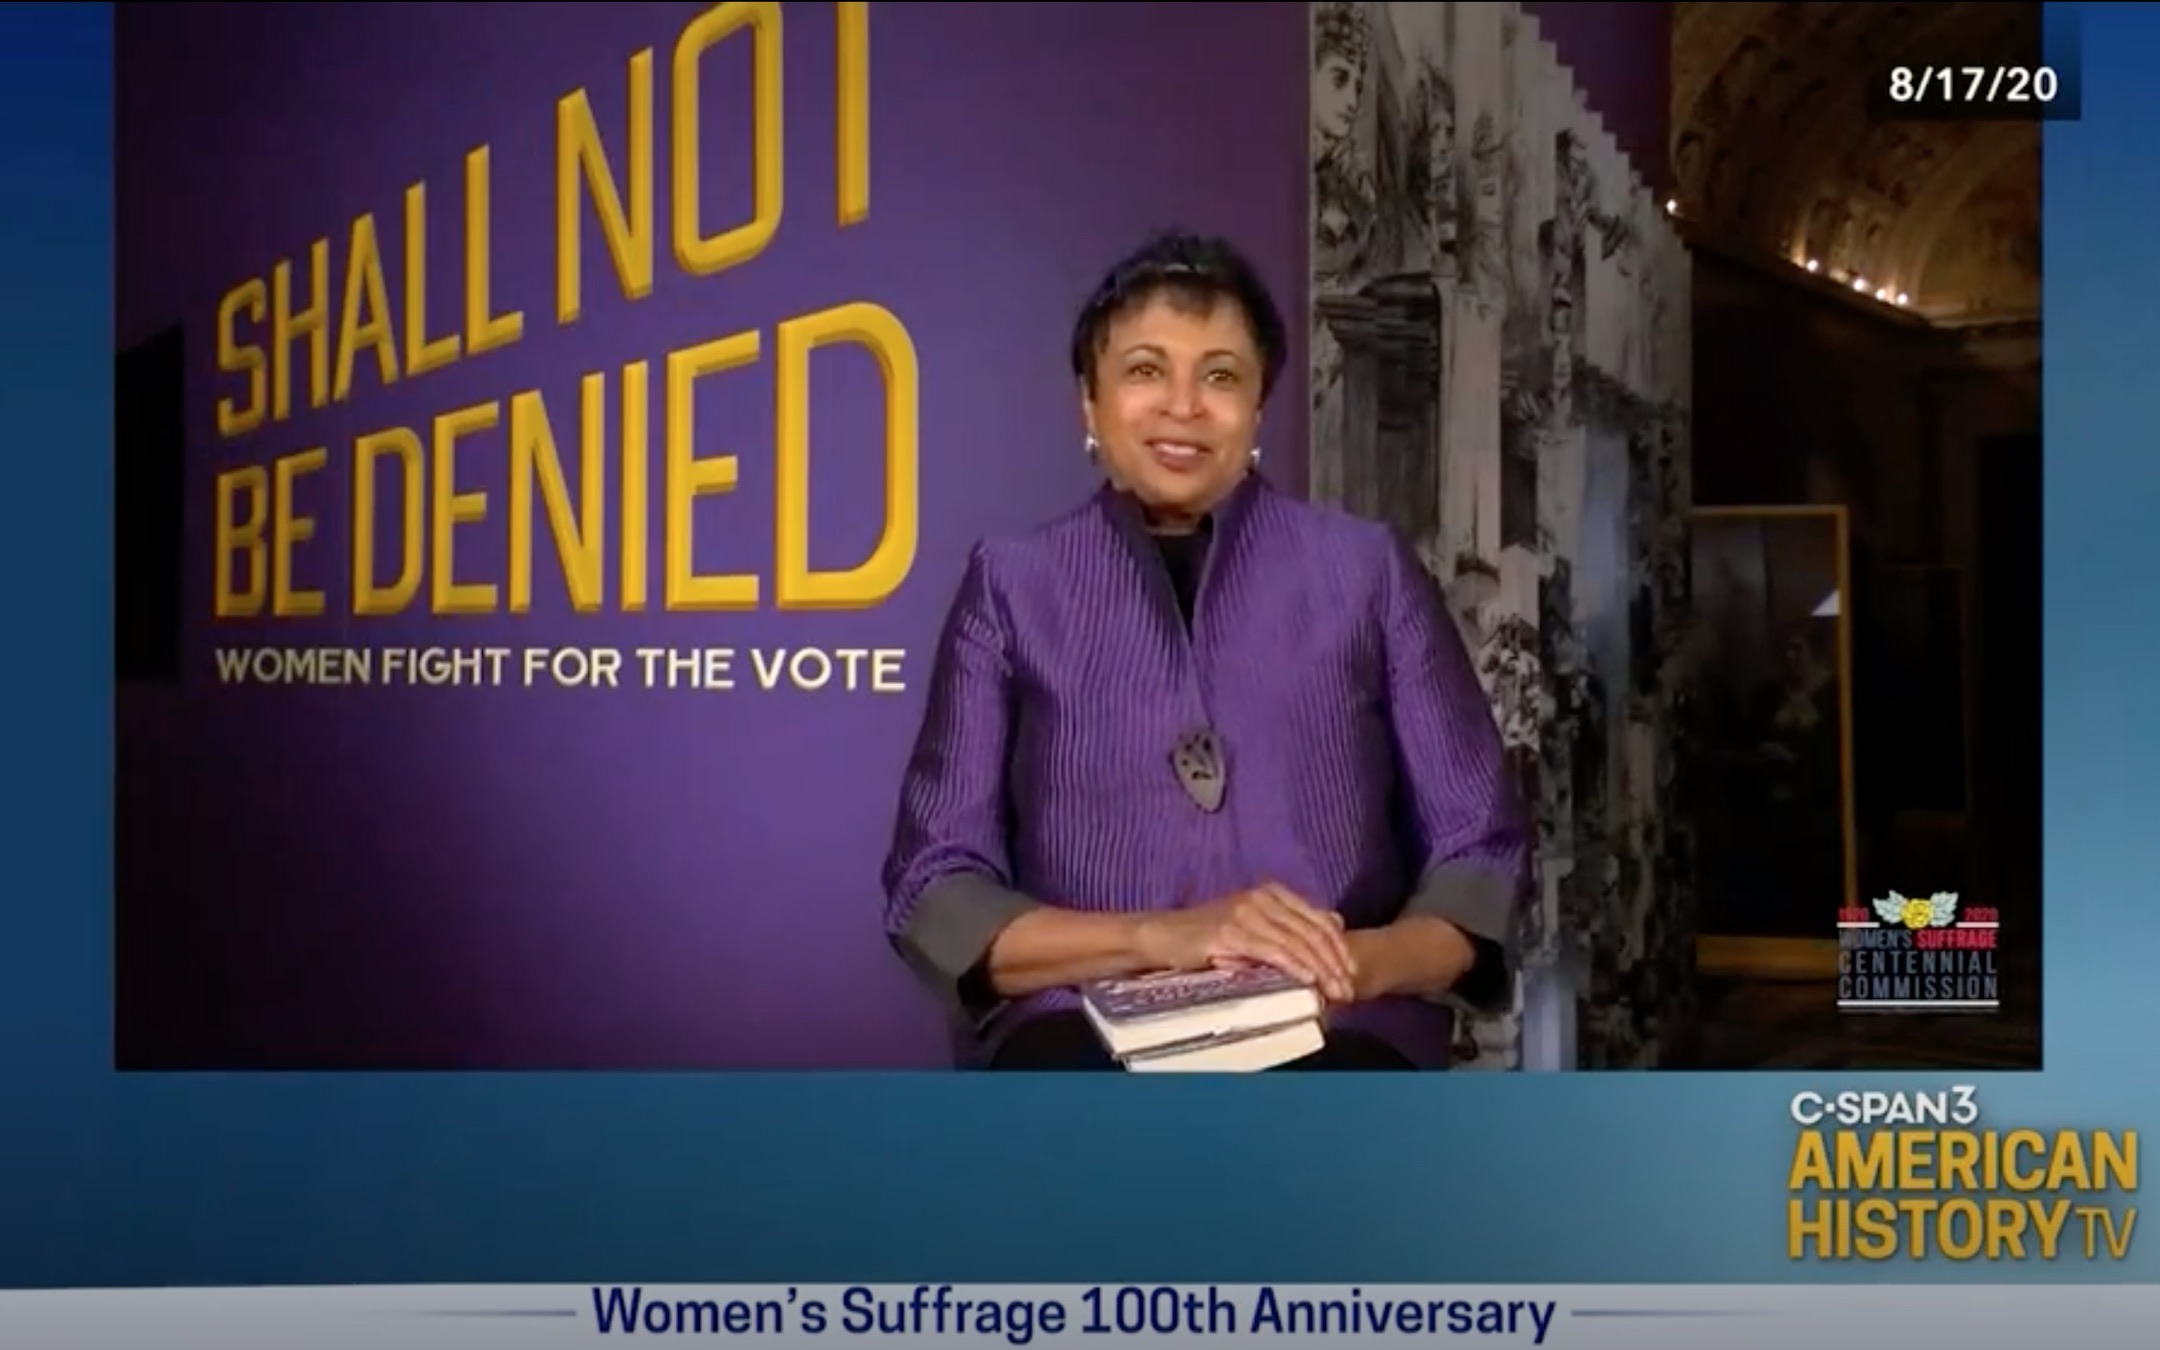 Roosevelt political science graduate Carla Hayden in the Library of Congress "Shall Not Be Denied" Exhibit